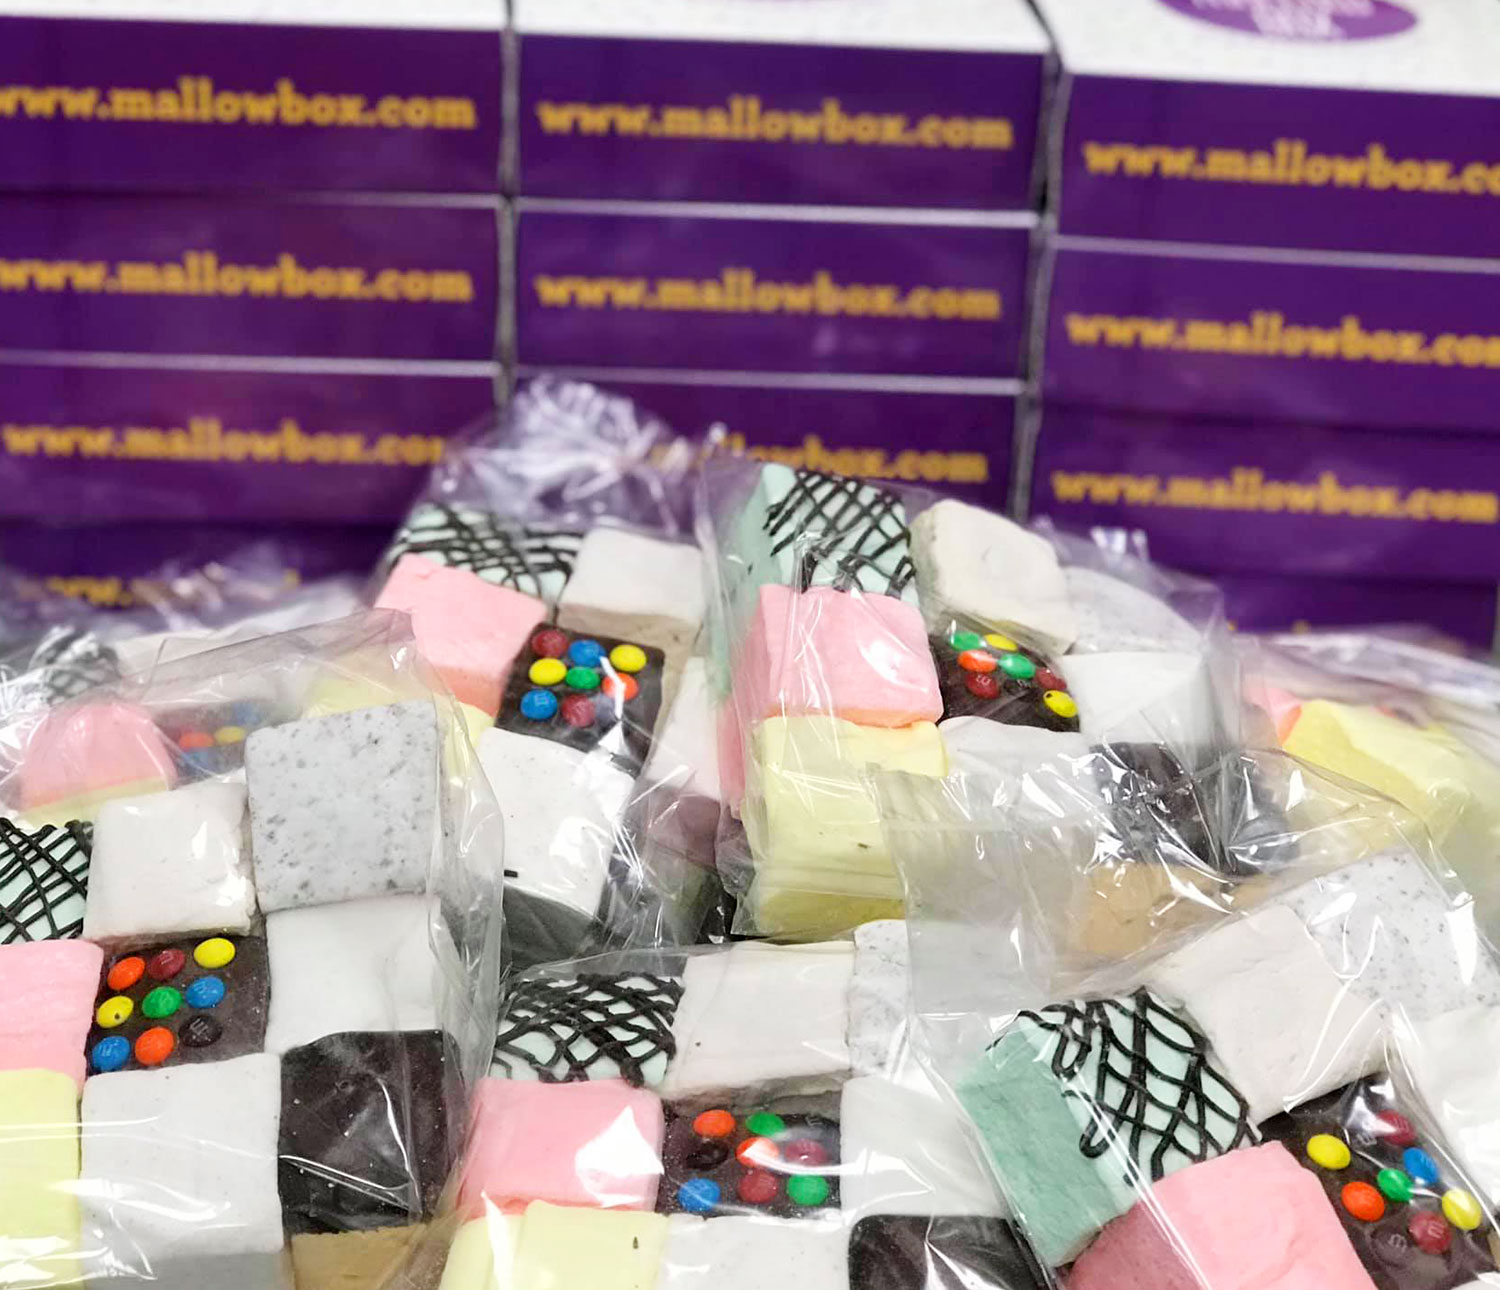 Mallow Box gift packages